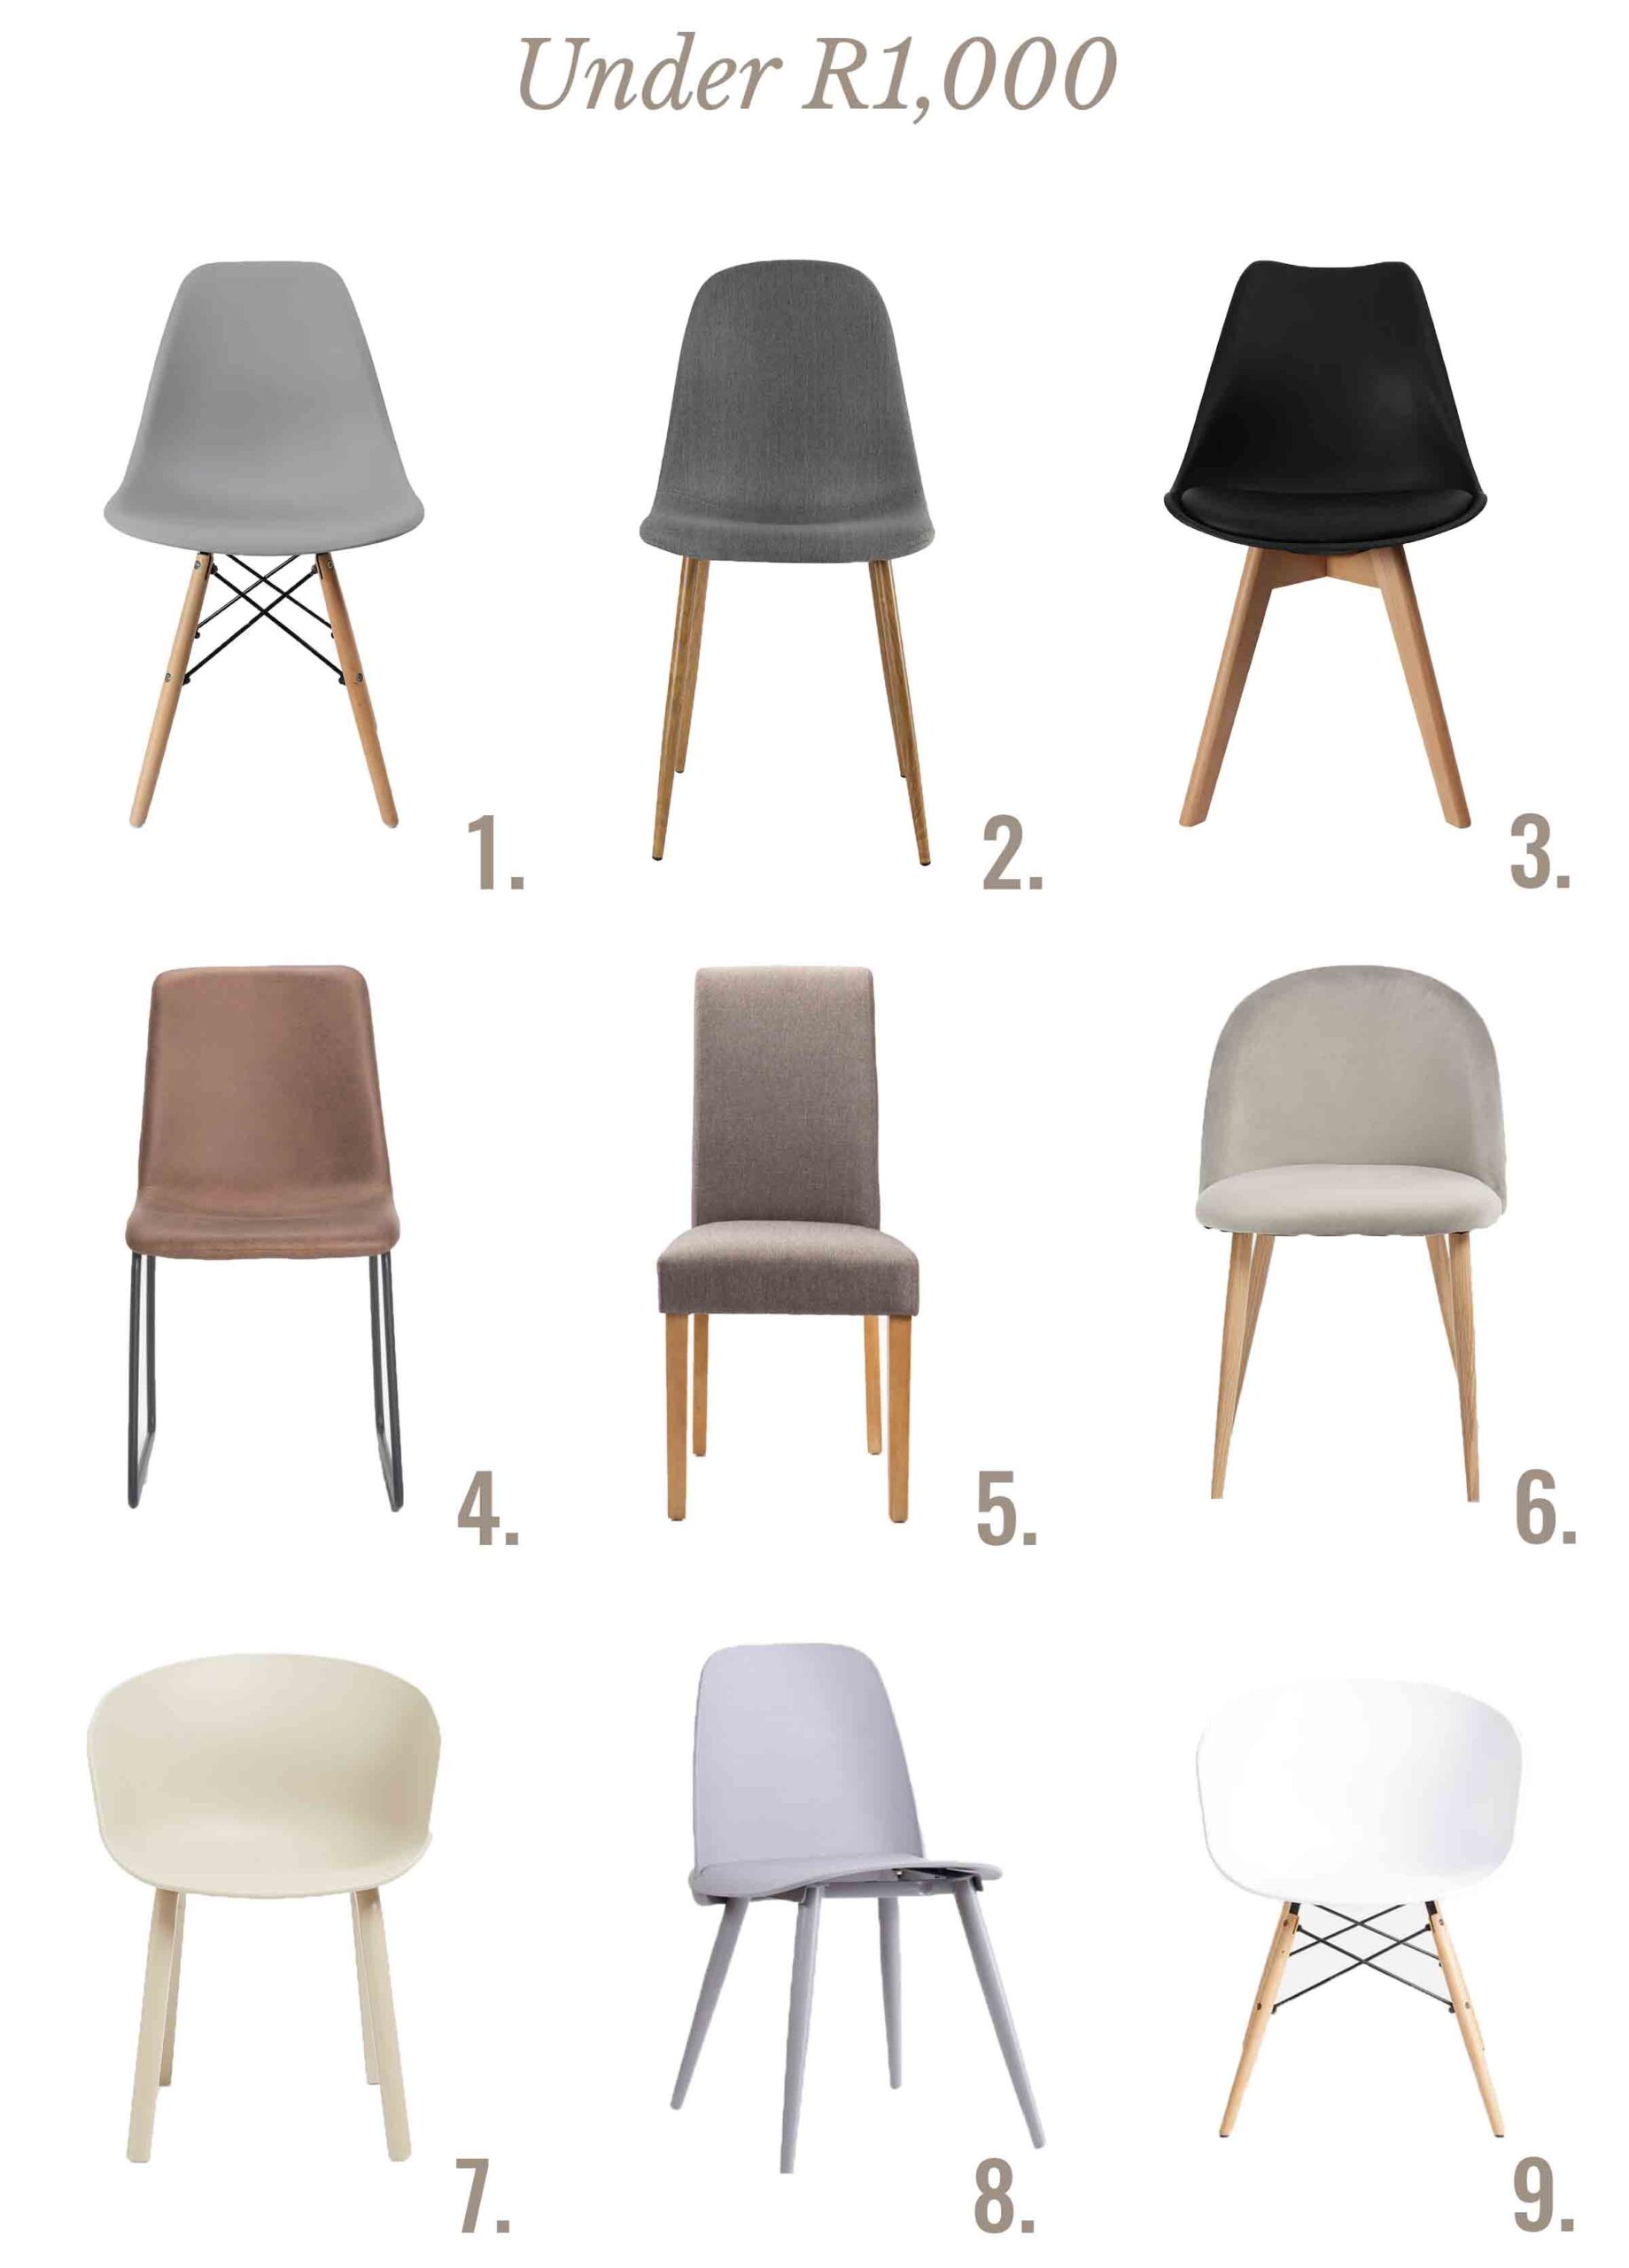 The Home Studio Dining Chair Guide